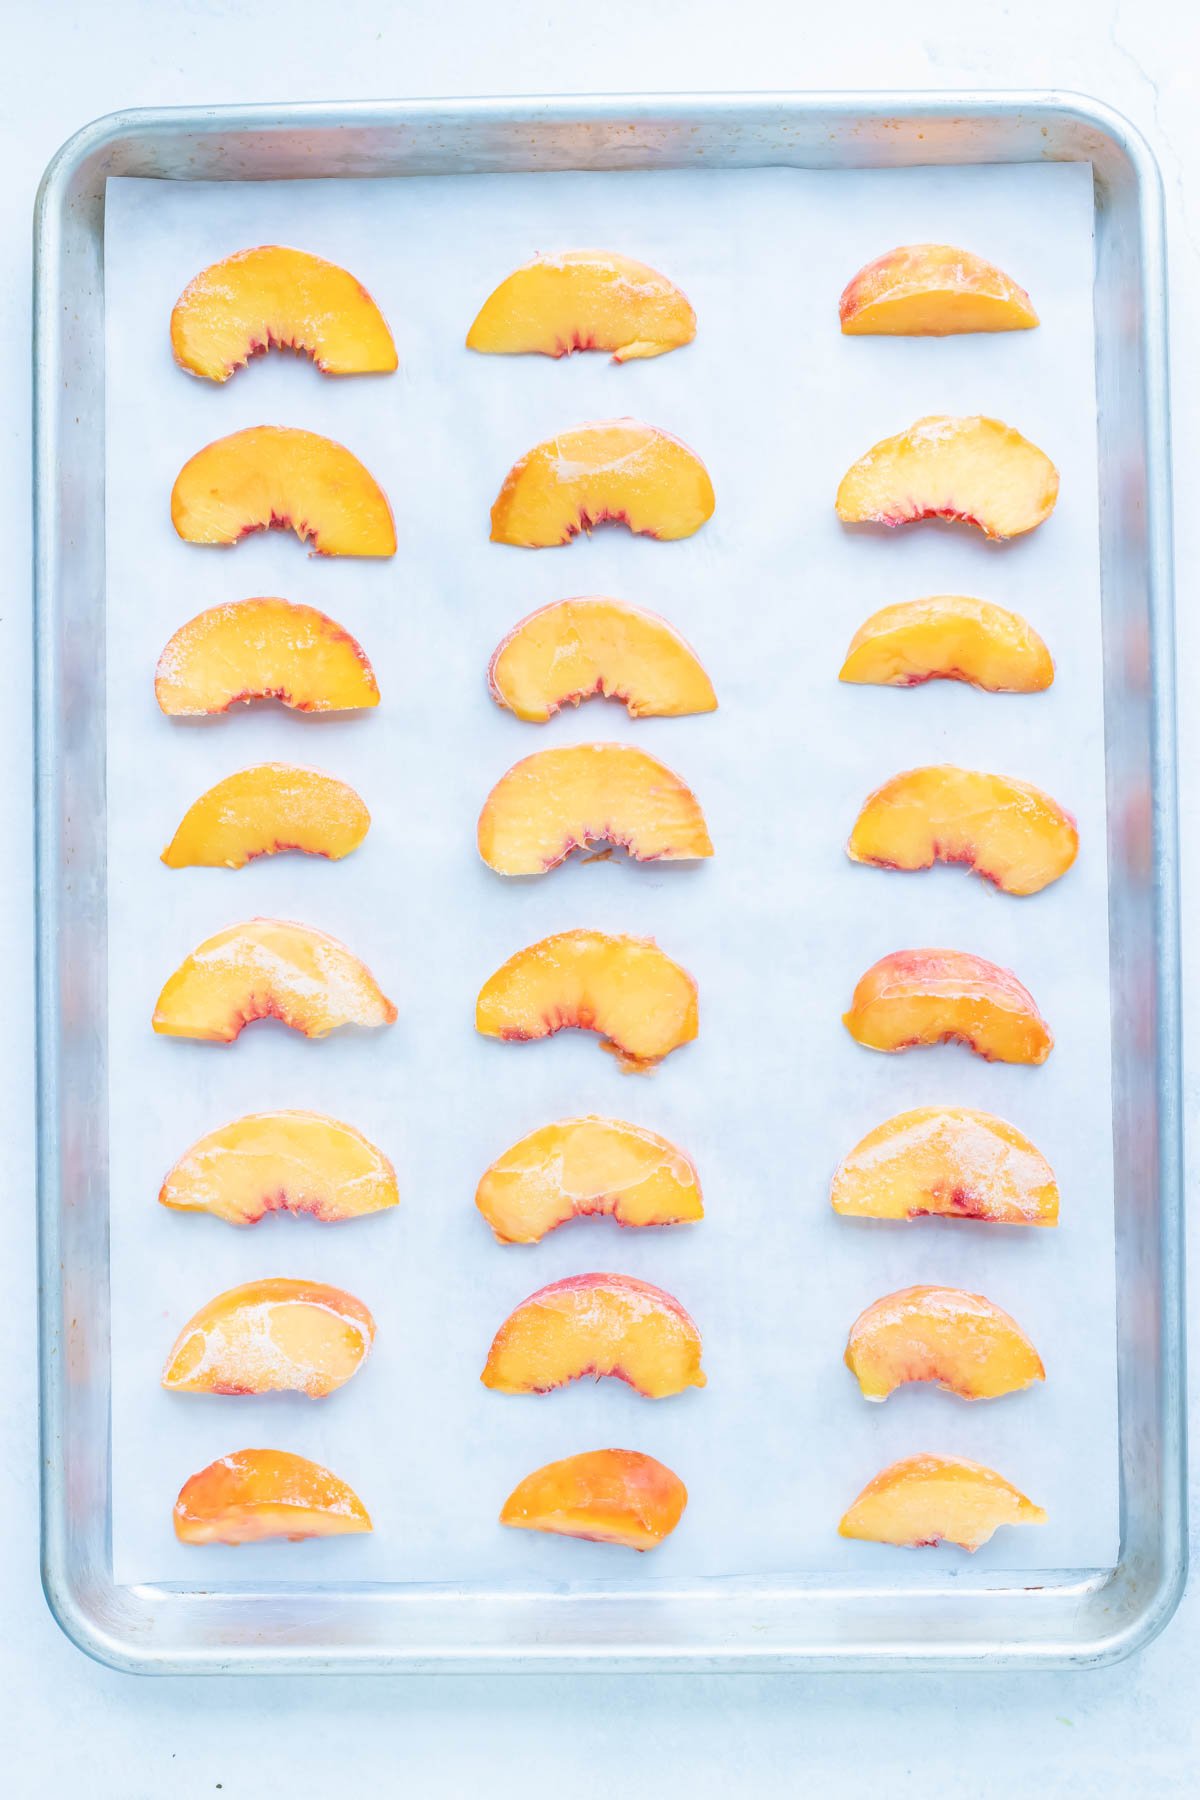 Parchment paper is covering a baking sheet where sliced peached are laid flat to be frozen for future recipes.